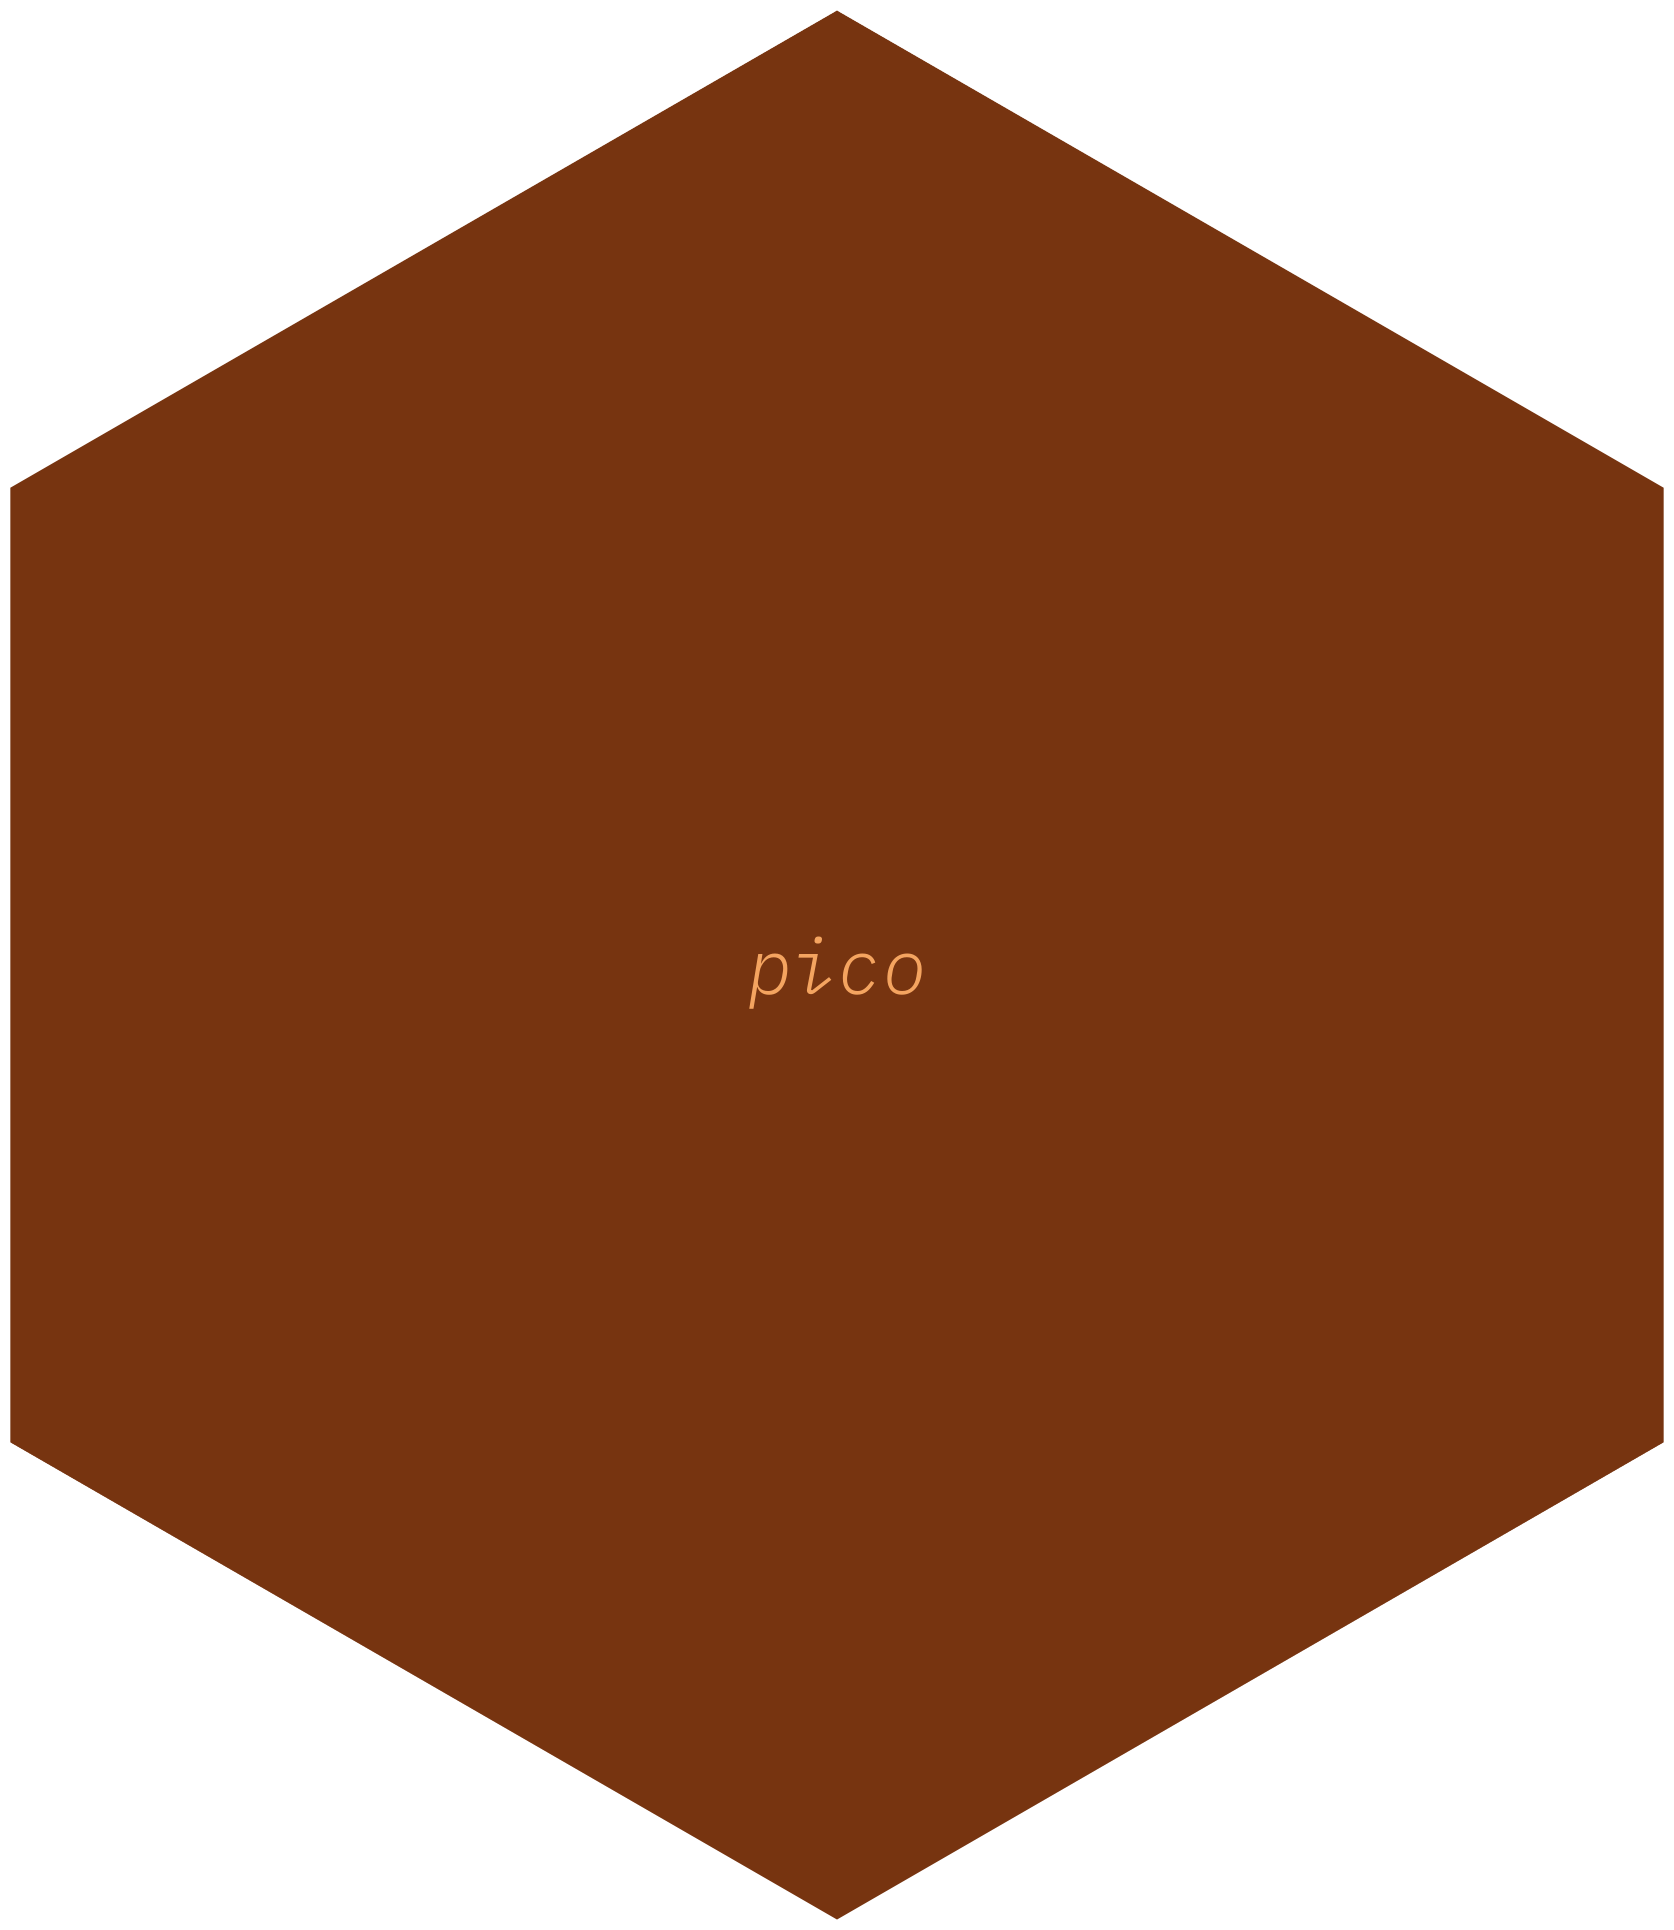 Hexagonal logo for the pico package with the package name in very small font in light brown on a darker brown background.